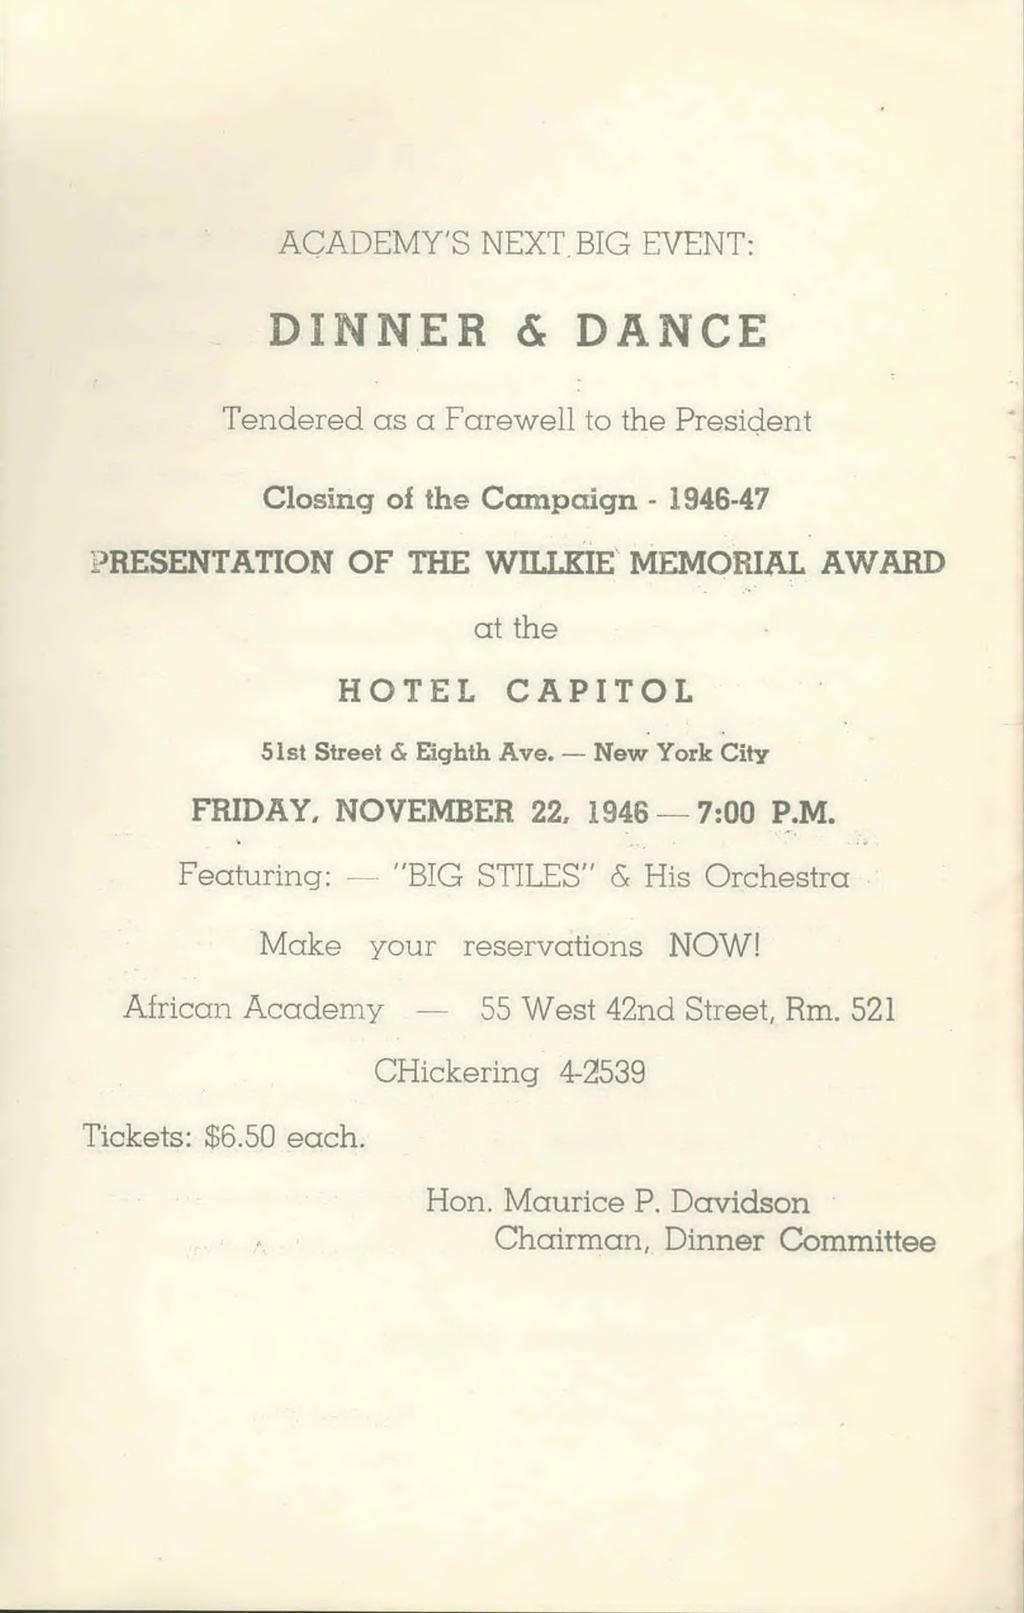 ACADEMY'S NEXT BIG EVENT: DINNER & DANCE Tendered as a Farewell to the President Closing of the Campaign - 1946-47 PRESENTATION OF THE WILLKIE MEMORIAL AWARD at the HOTEL CAPITOL 51st Street & Eighth